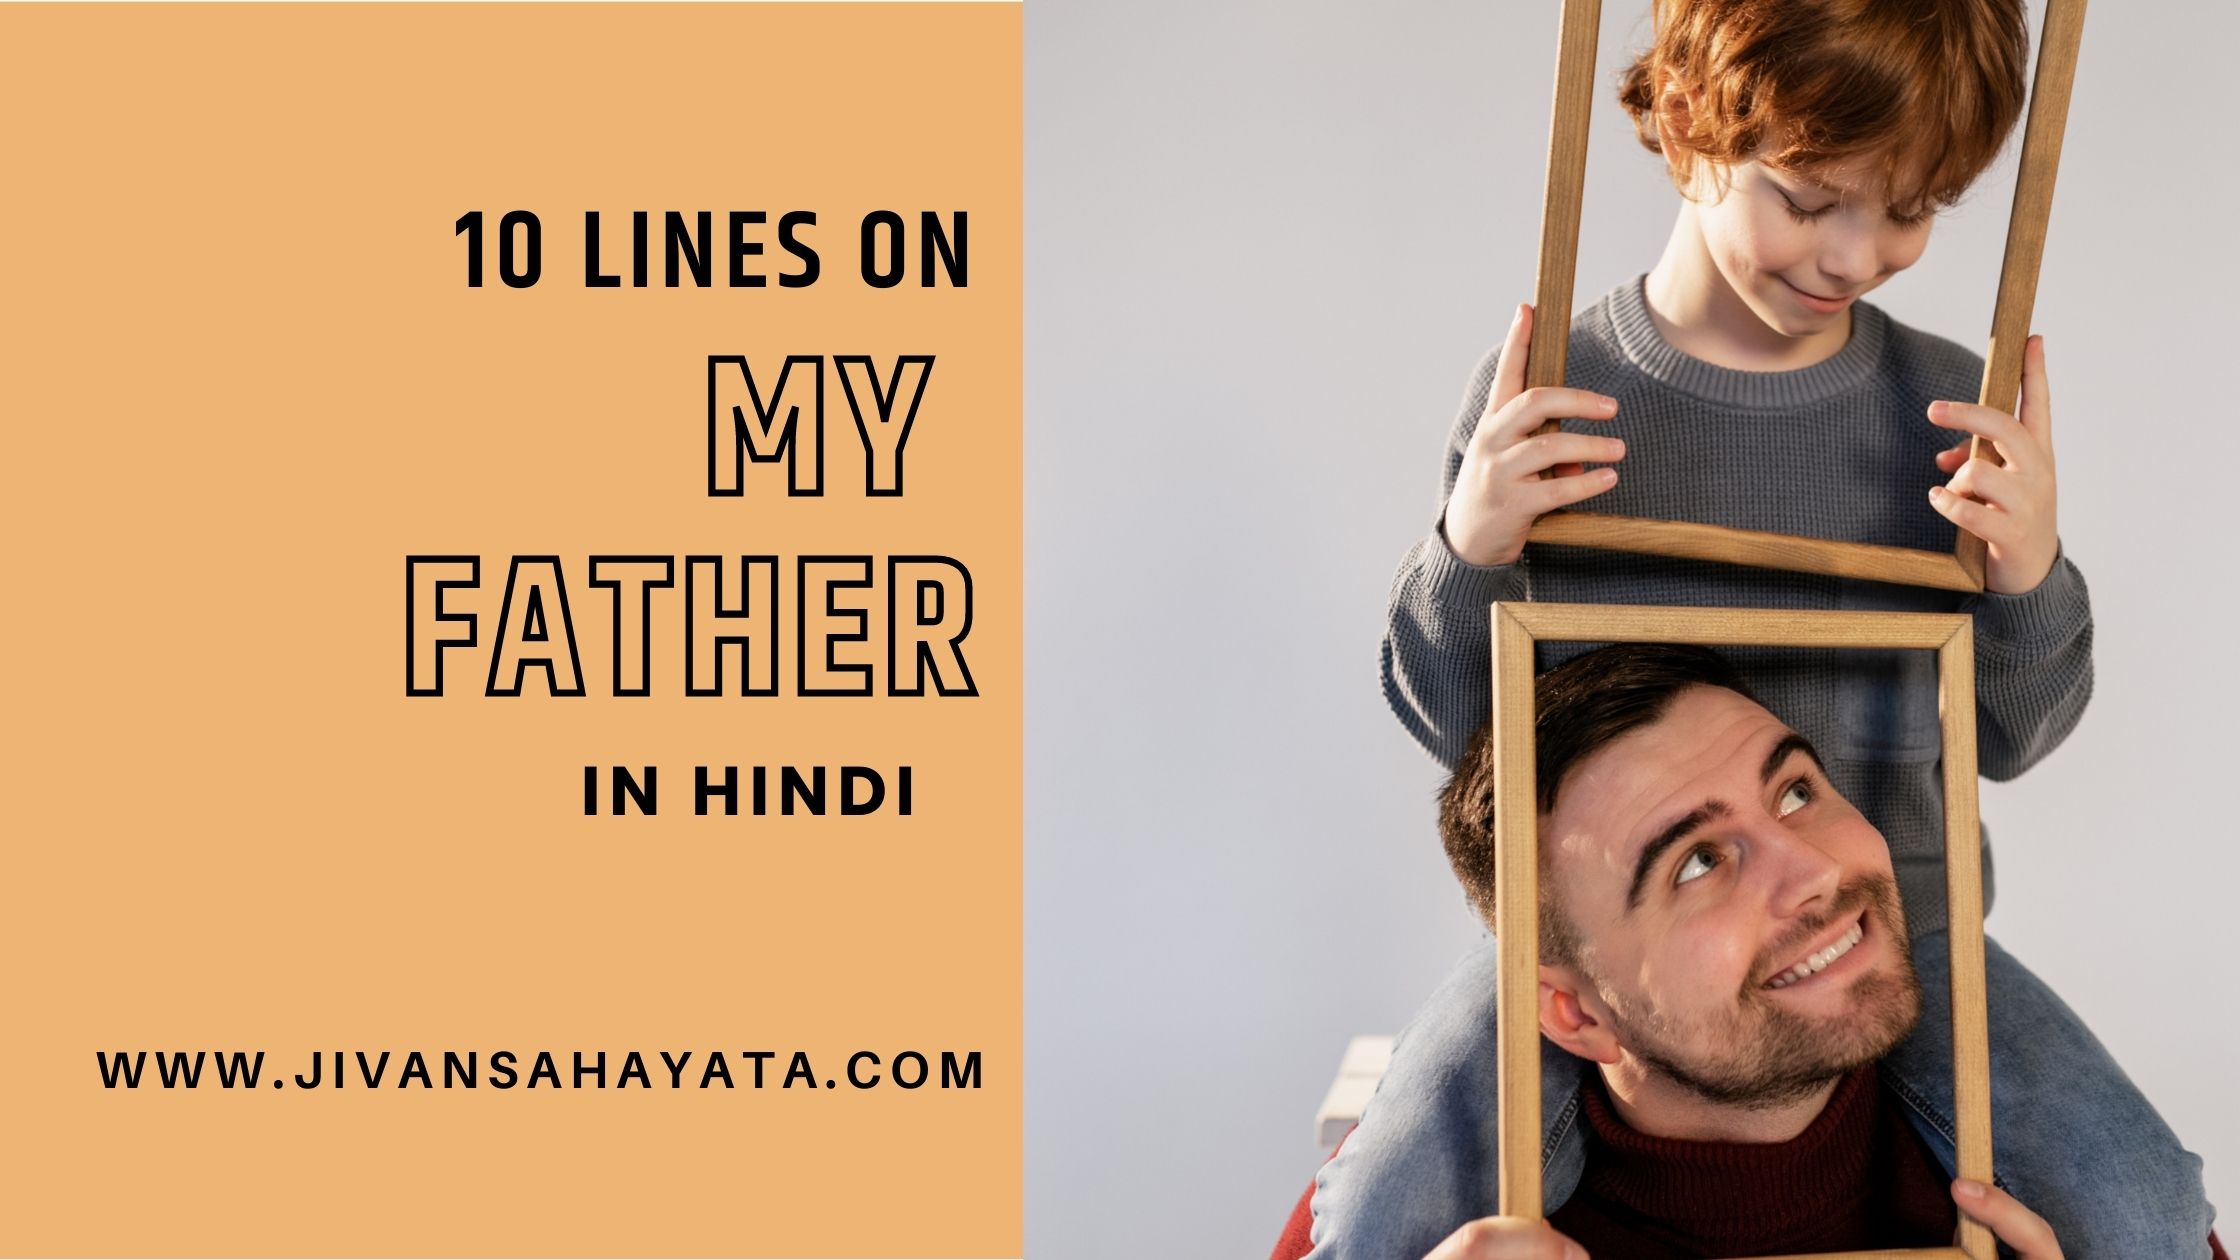 10 Lines On My Father In Hindi